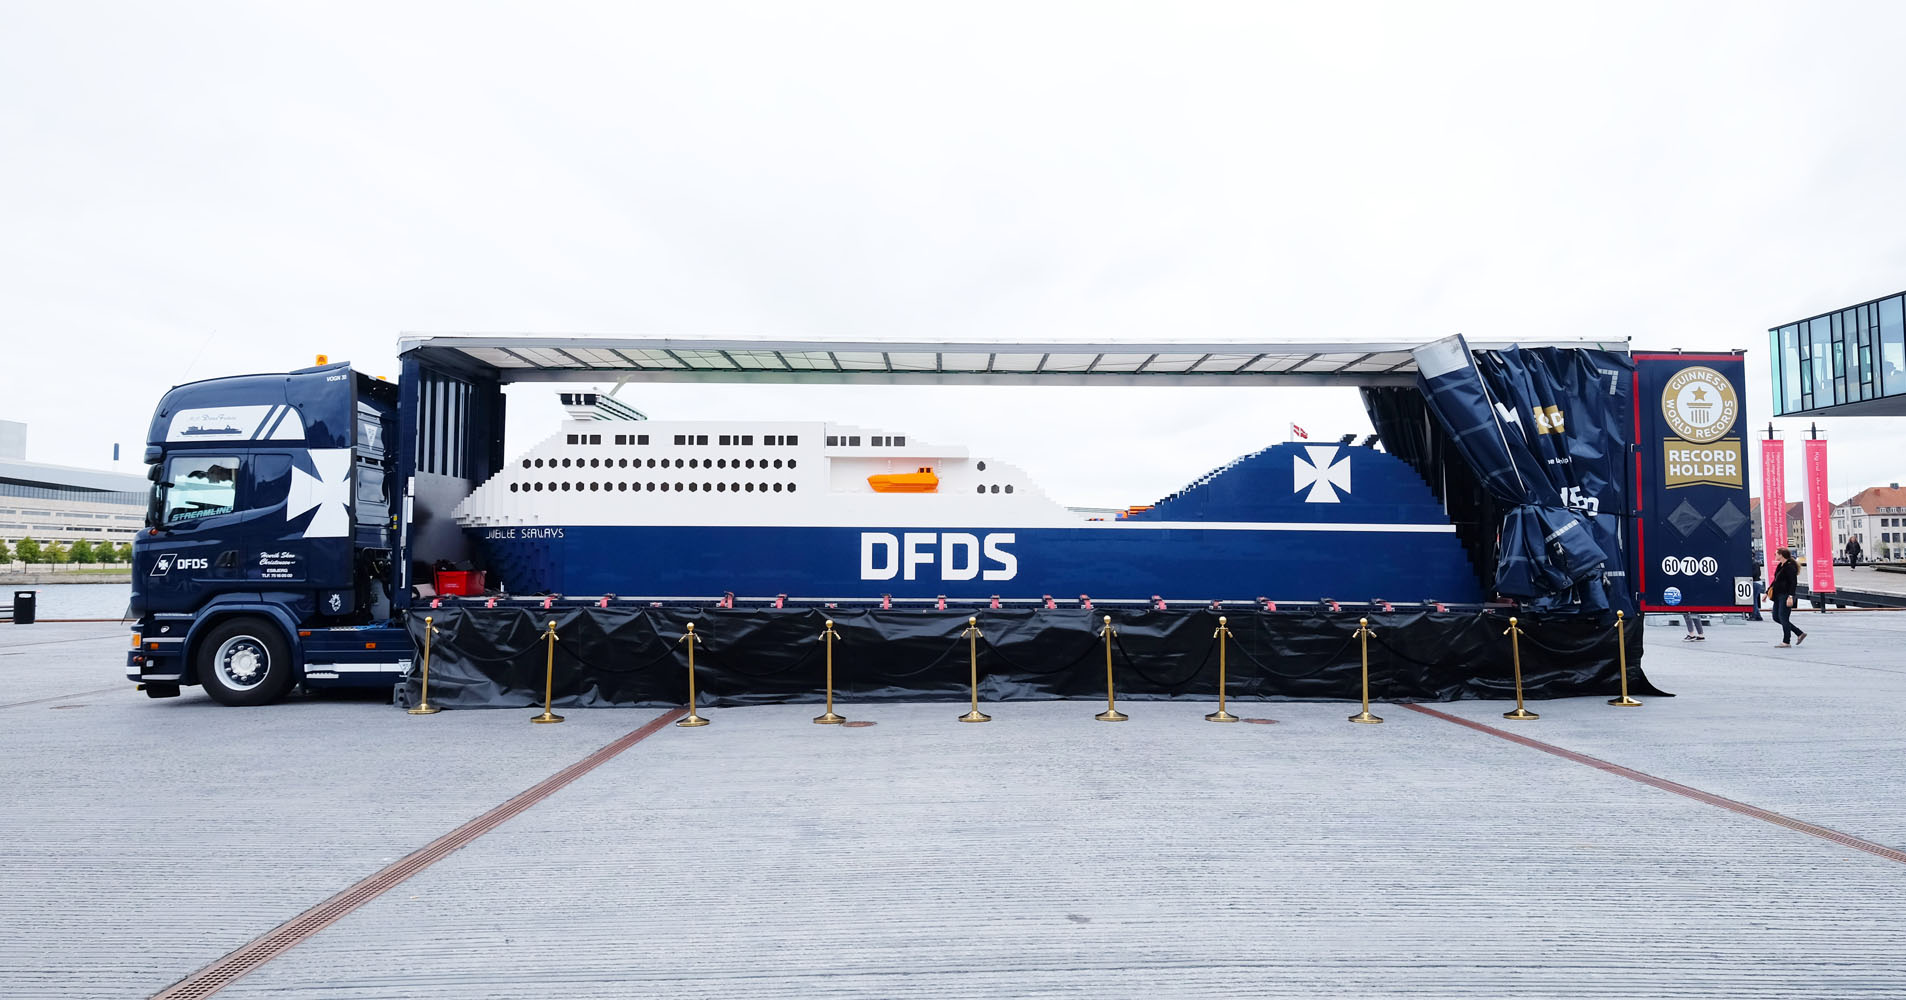 dfds-lego-schiff_totale_bearbeitet-1